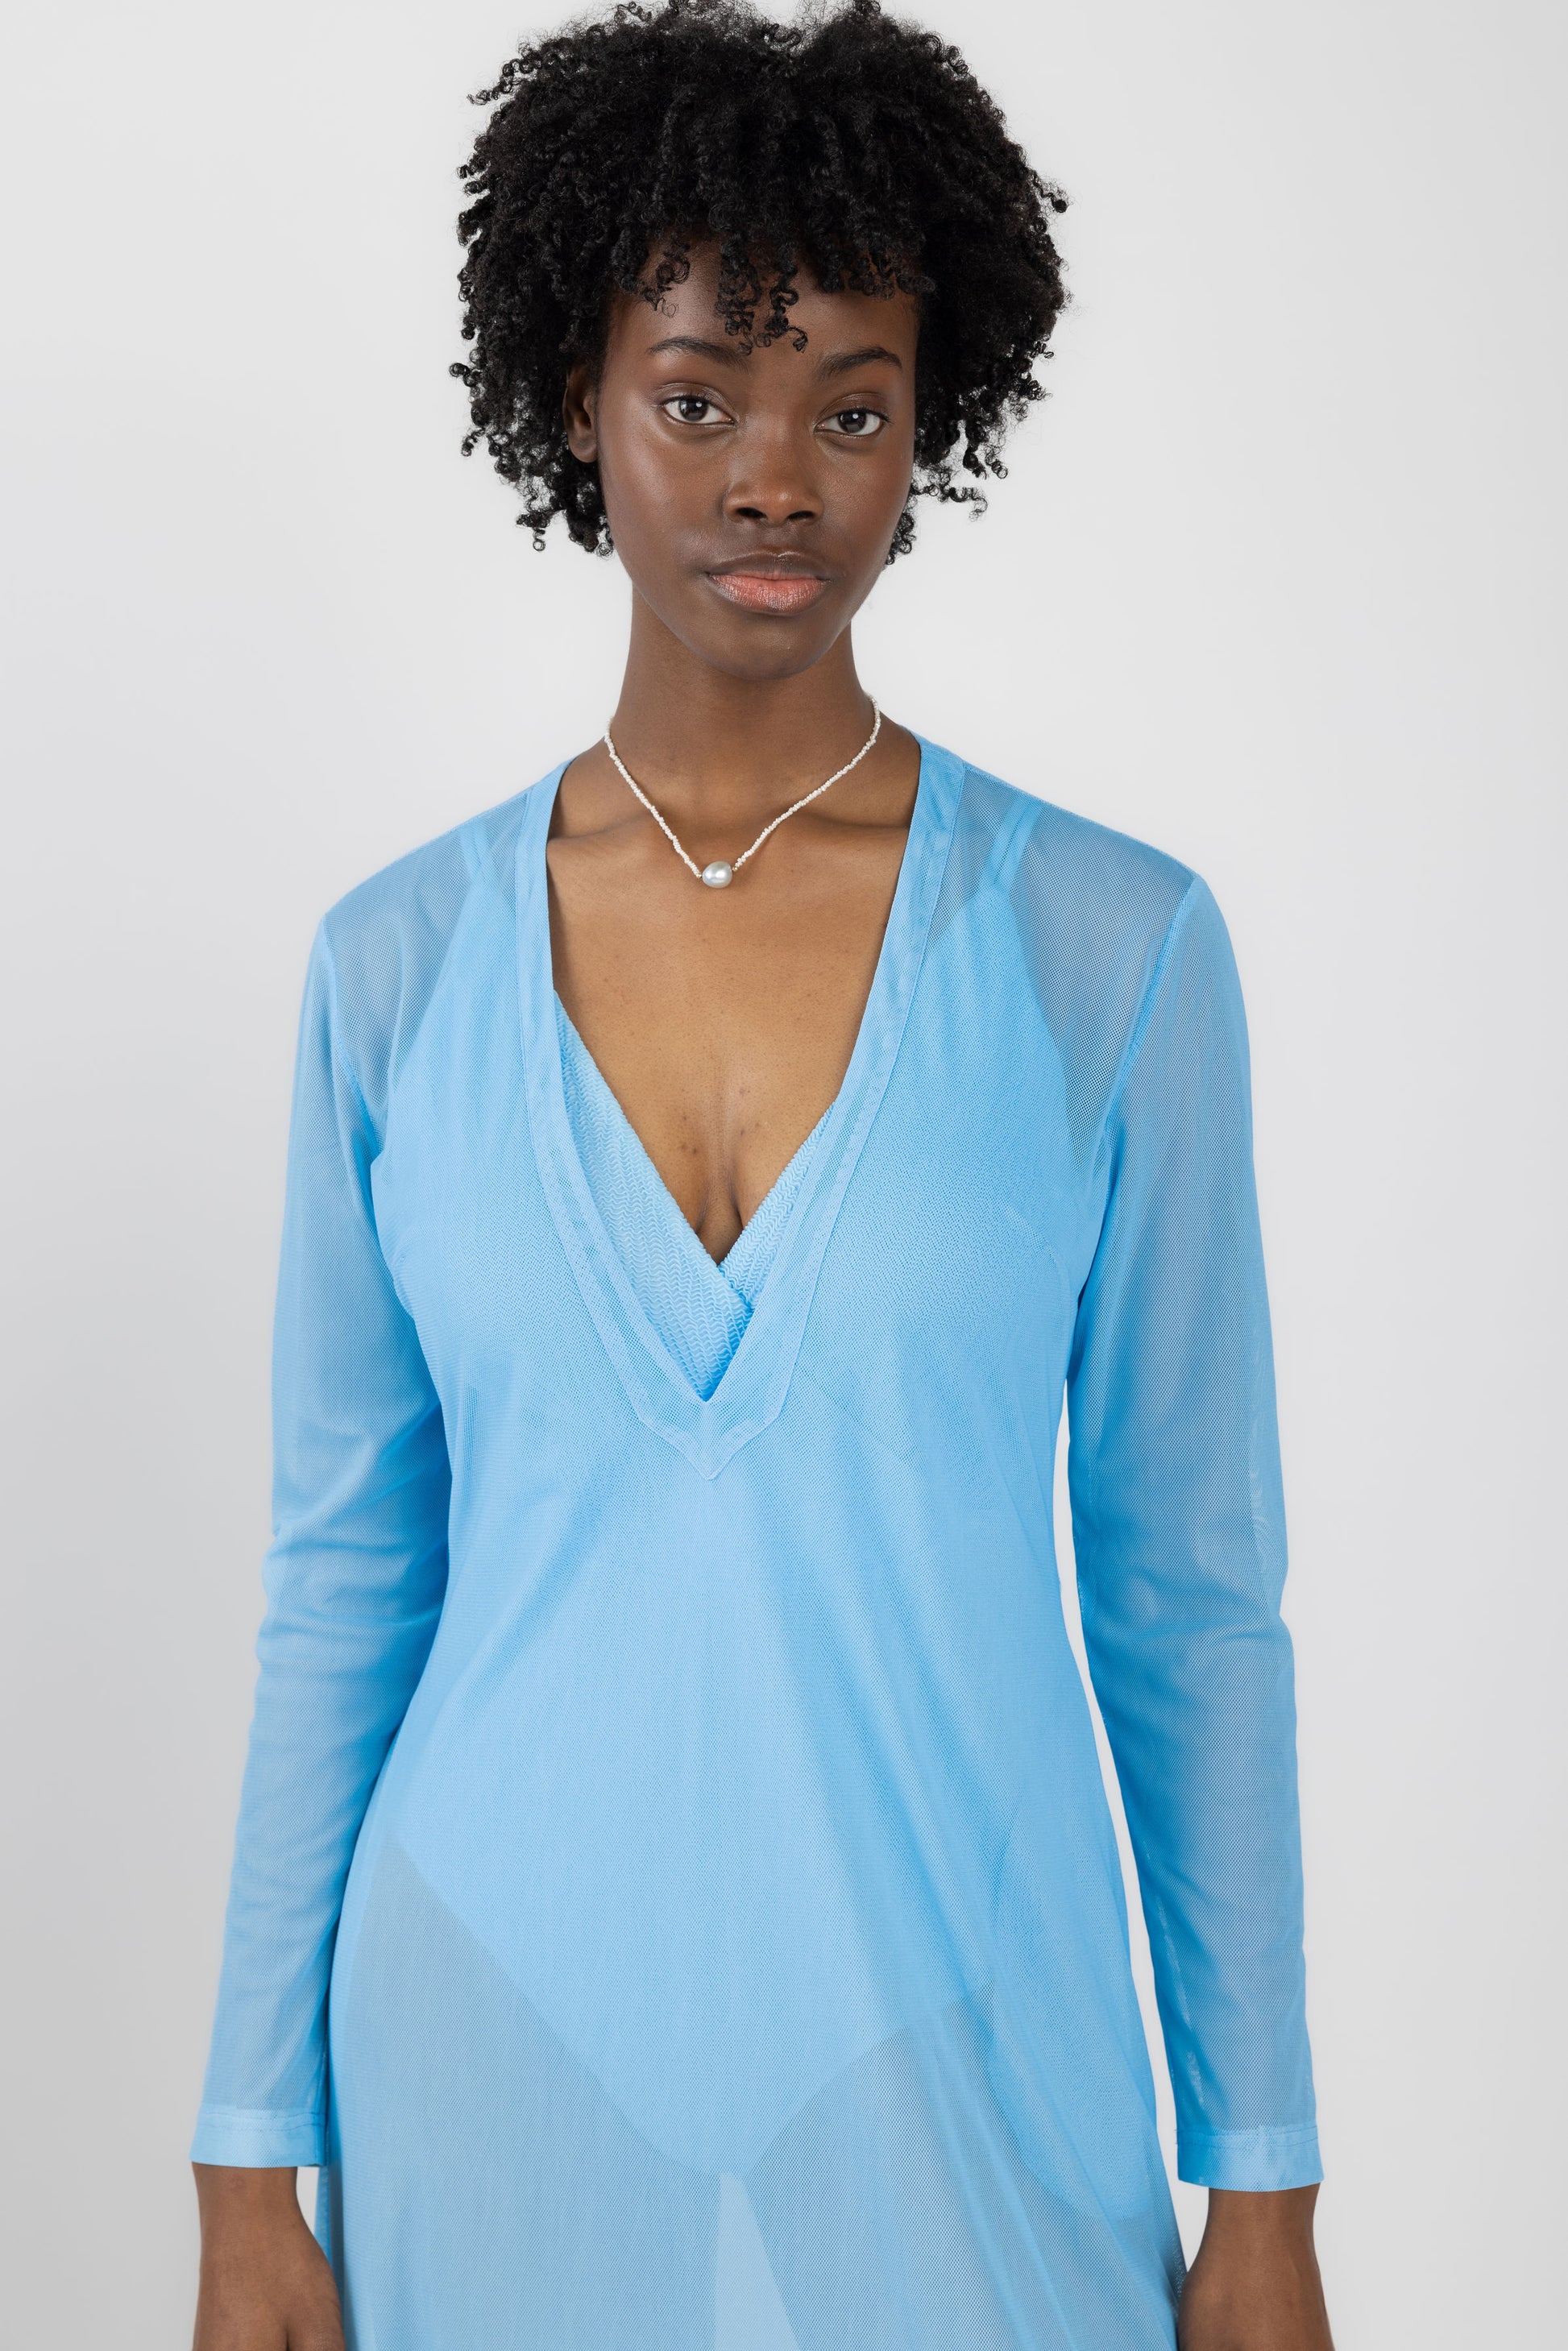 PELSO Lily N°58.1 Printed Mesh Cover Up in Blue Heron